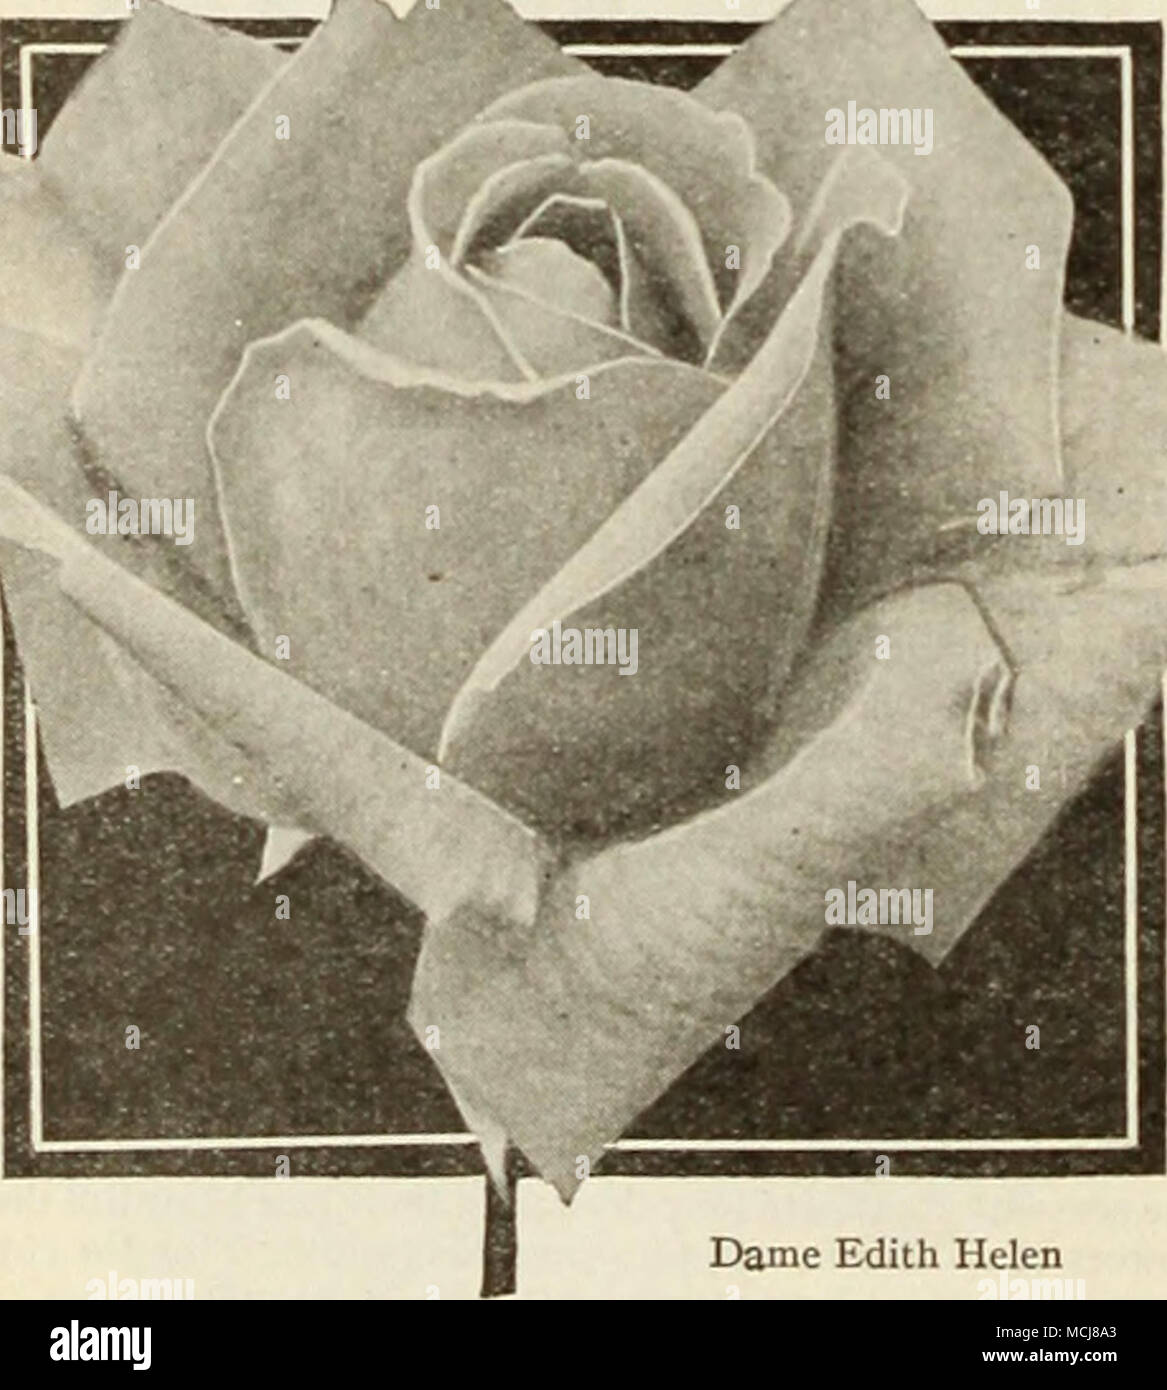 . Dame Edith Helen Dame Edith Helen. Lovely long pointed buds developing into great flowers composed of substantial broad petals wliich curl back most attractively. The blooms are fully double, high- centered, and delightfully sweet-scented. They are a brilliant yet soft Rose-du-Barri pink. A vigorous Rose of splendid upright habit bearing a great profusion of artistic flowers. 75c each; $8.00 per doz. Duchess of AthoU. Large, globular buds of deep bronzy orange and splendid, large, double, cup-shaped flowers of a vivid orange, flushed old rose. The blooms are intensely fragrant. Vigorous and  Stock Photo